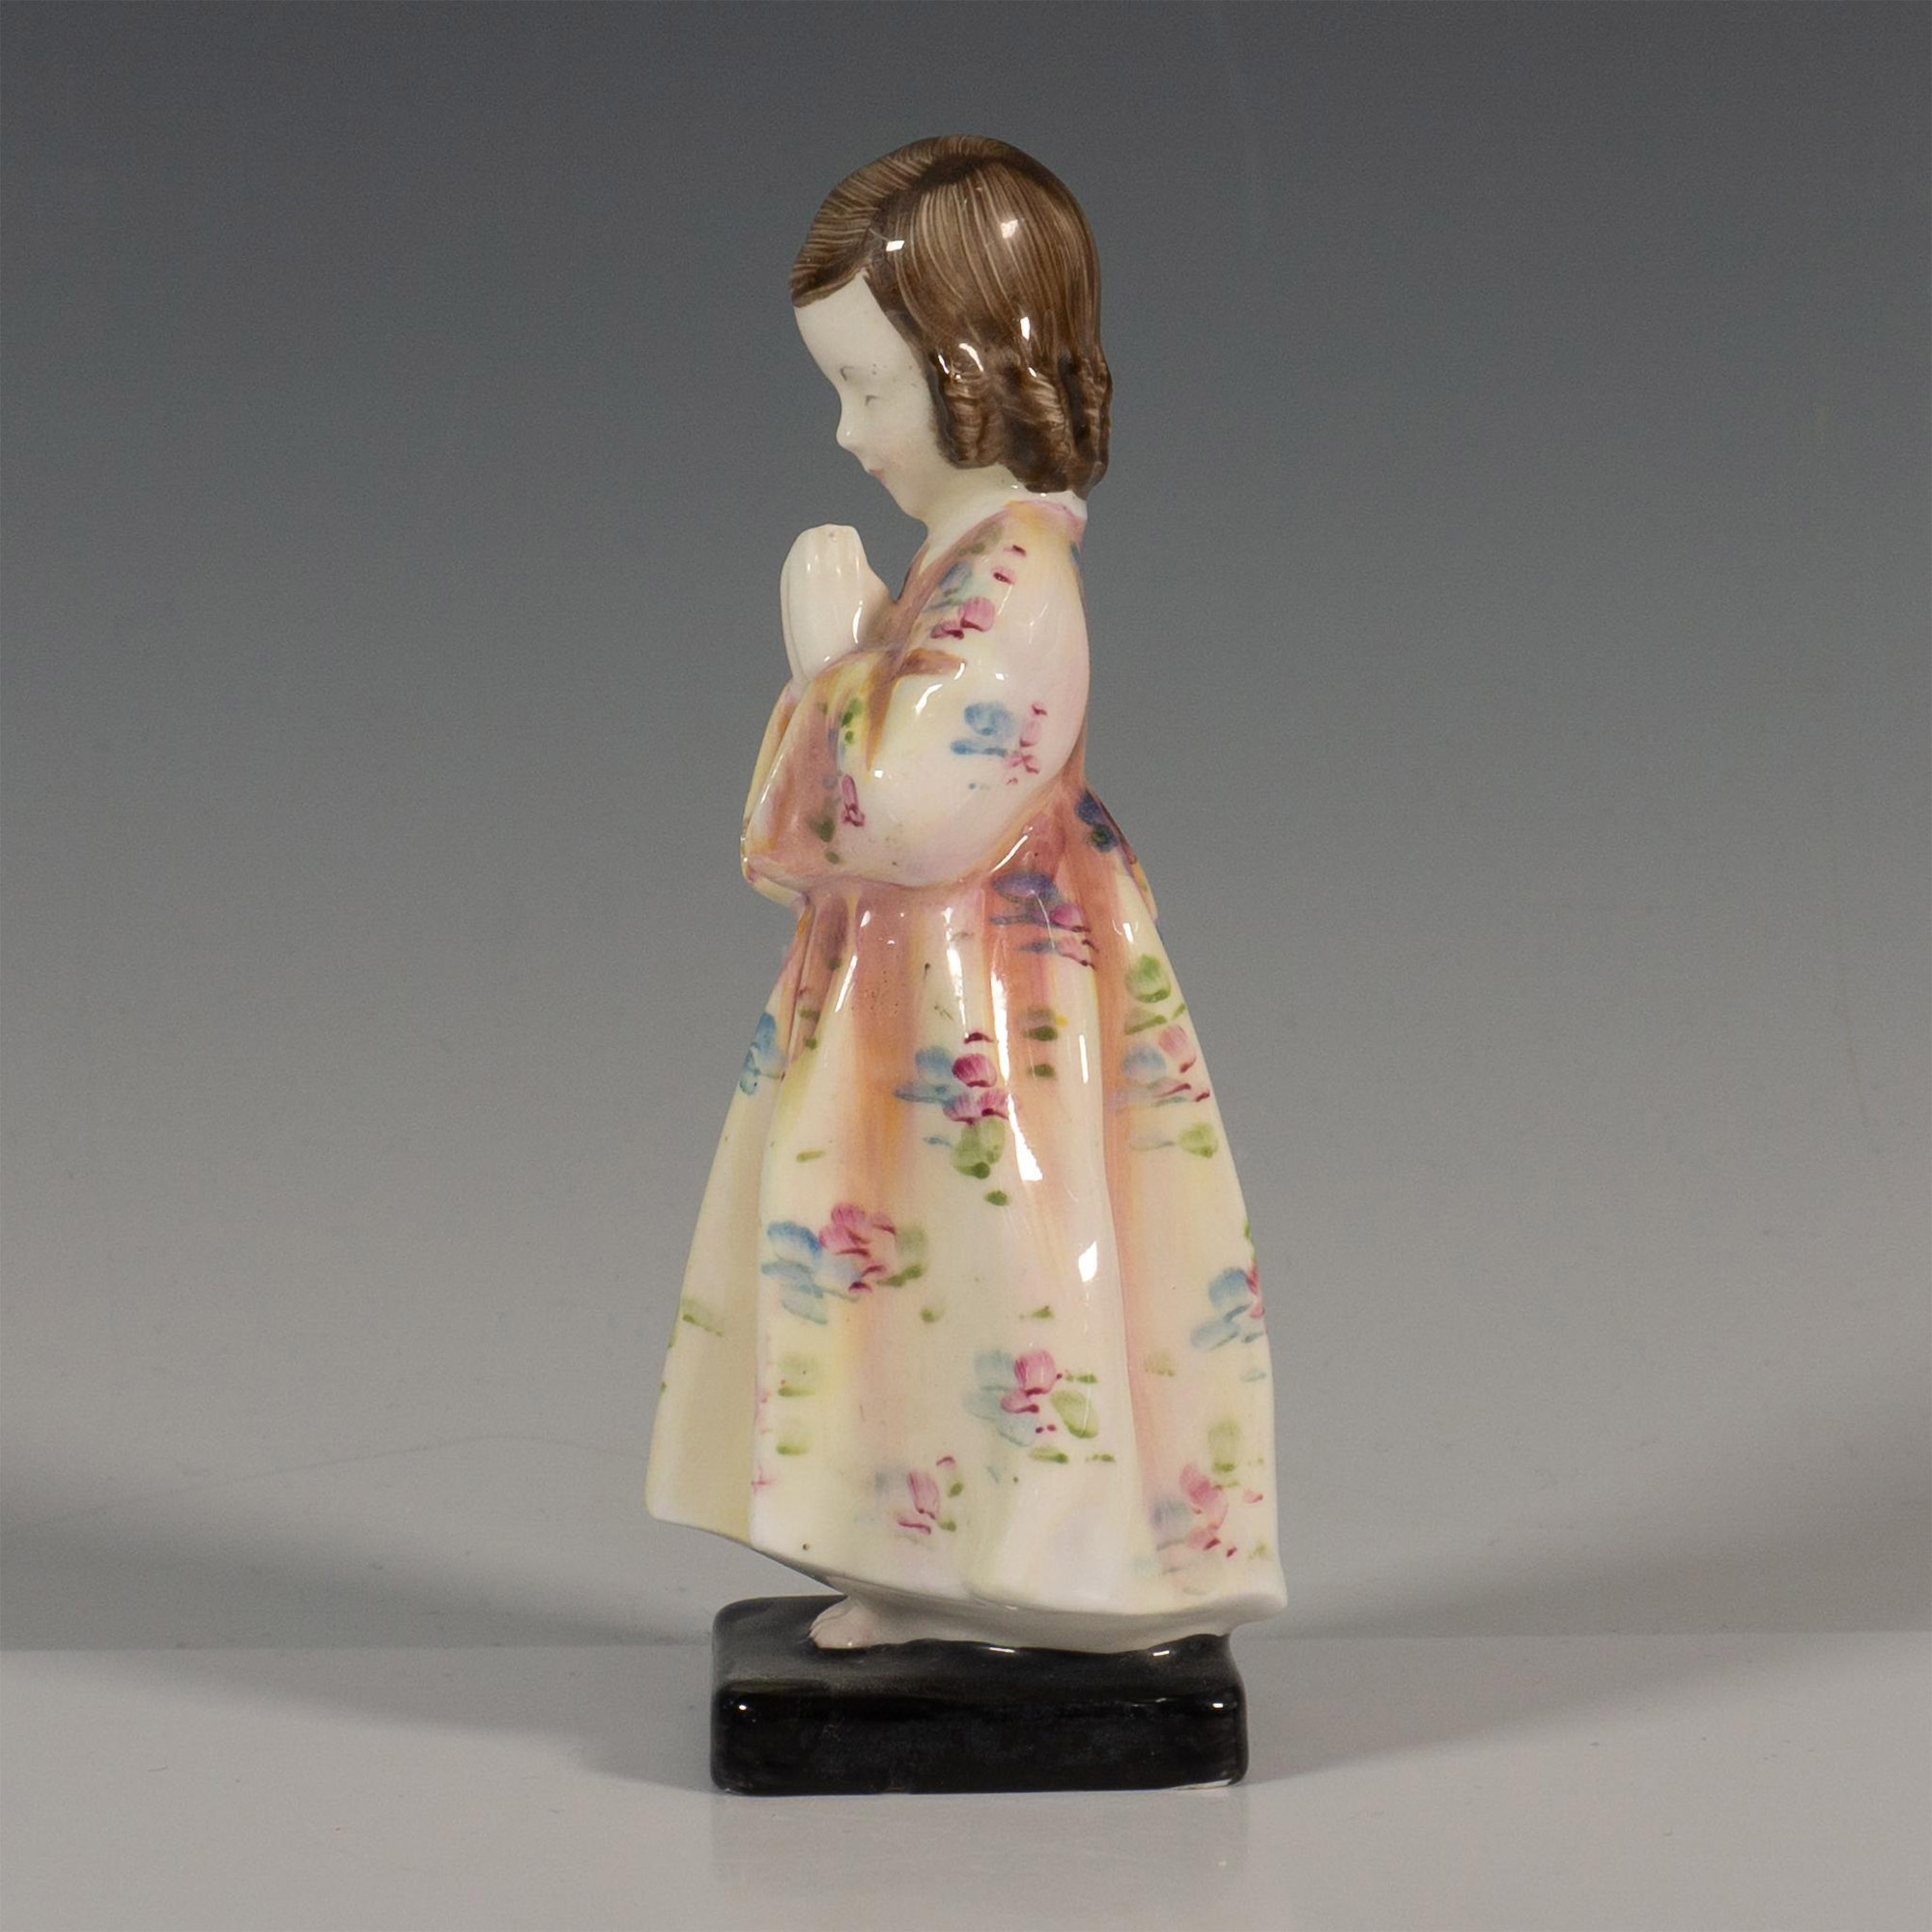 Bedtime HN1978, Prototype Colorway - Royal Doulton Figurine - Image 3 of 5